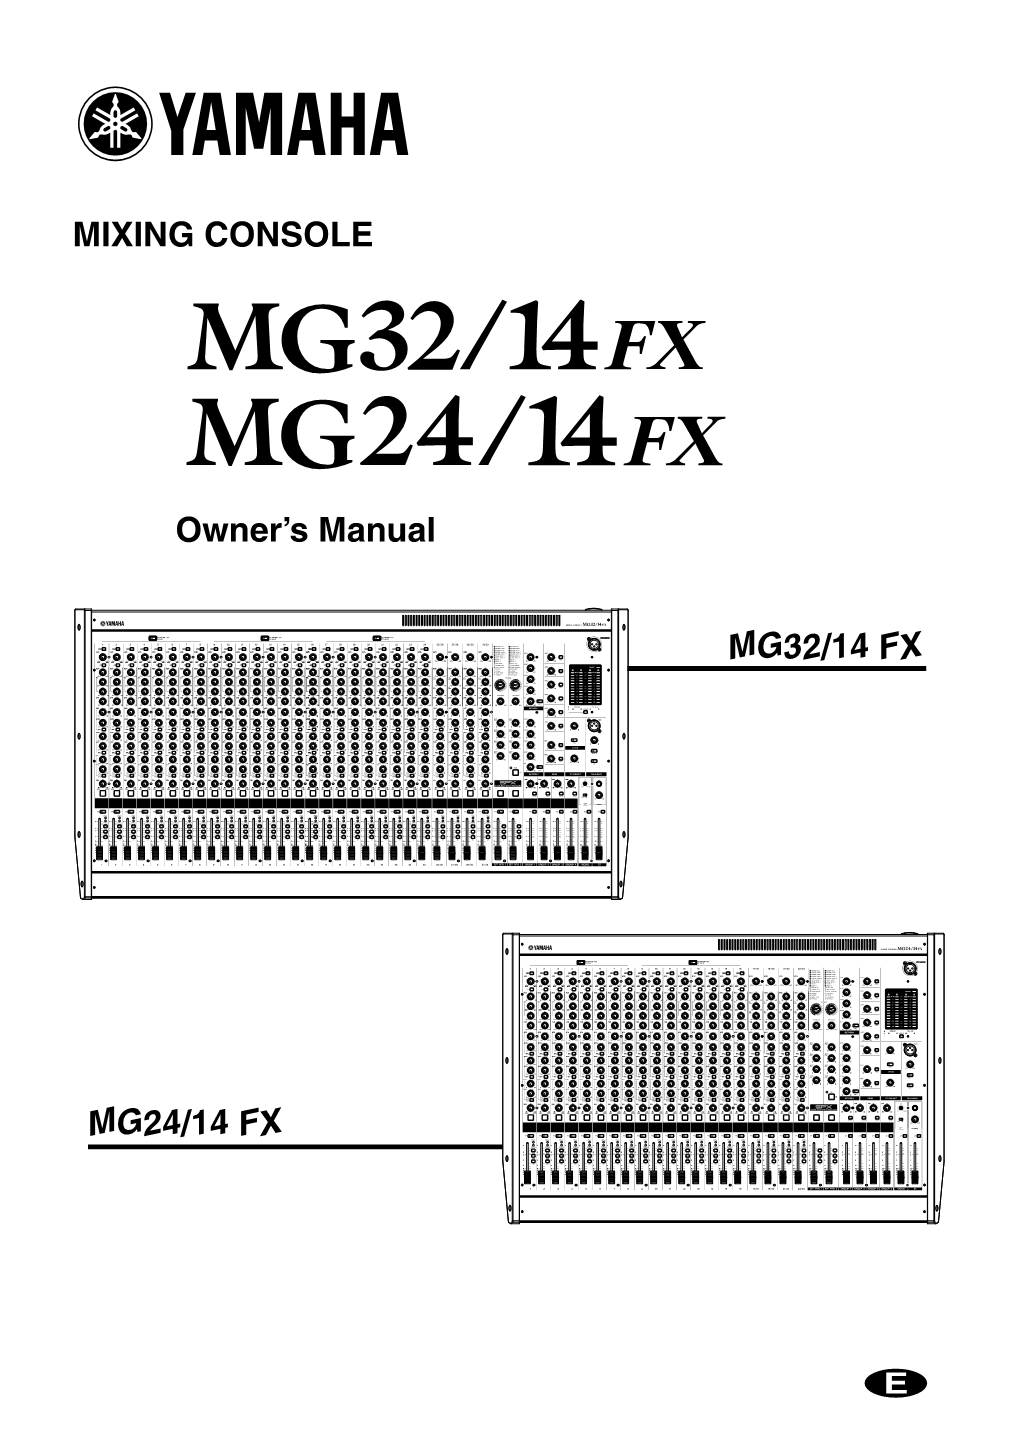 MIXING CONSOLE Owner's Manual MG32/14 FX MG24/14 FX